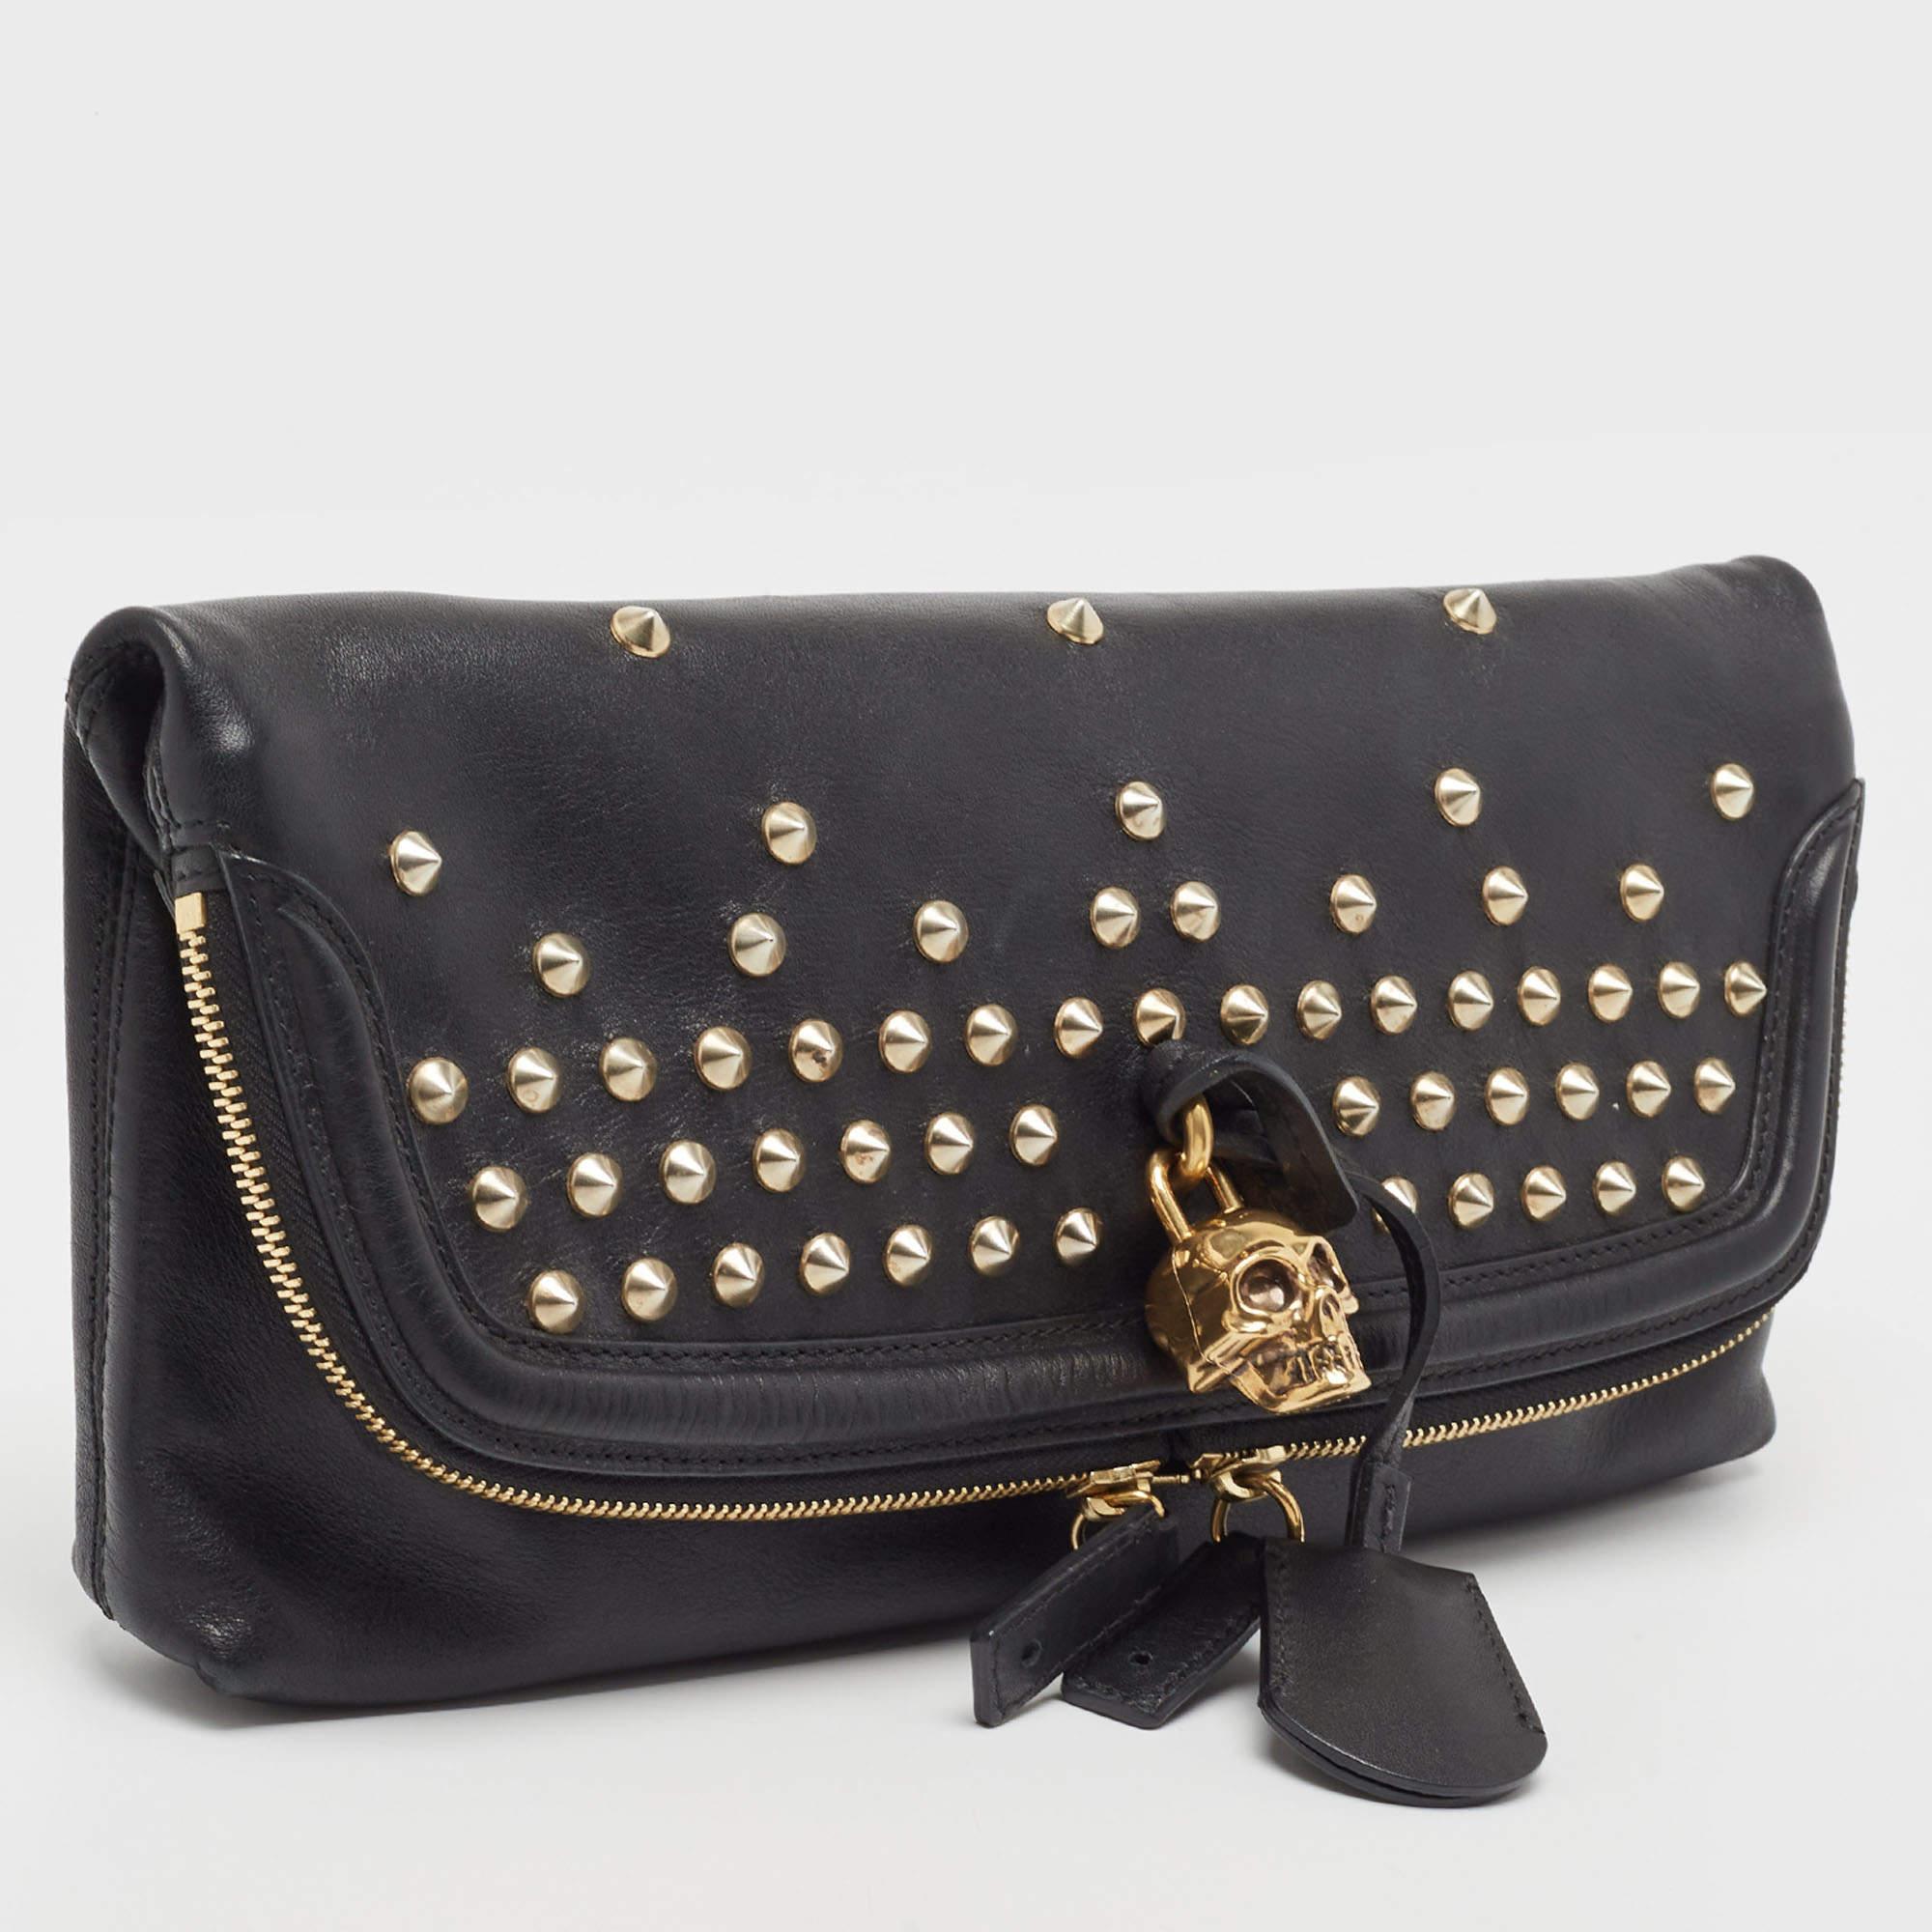 This Alexander McQueen clutch is a creation marked by excellent craftsmanship and refined style. This flap-style clutch is crafted with skill and impeccably finished to be a luxurious accessory in your hand.

